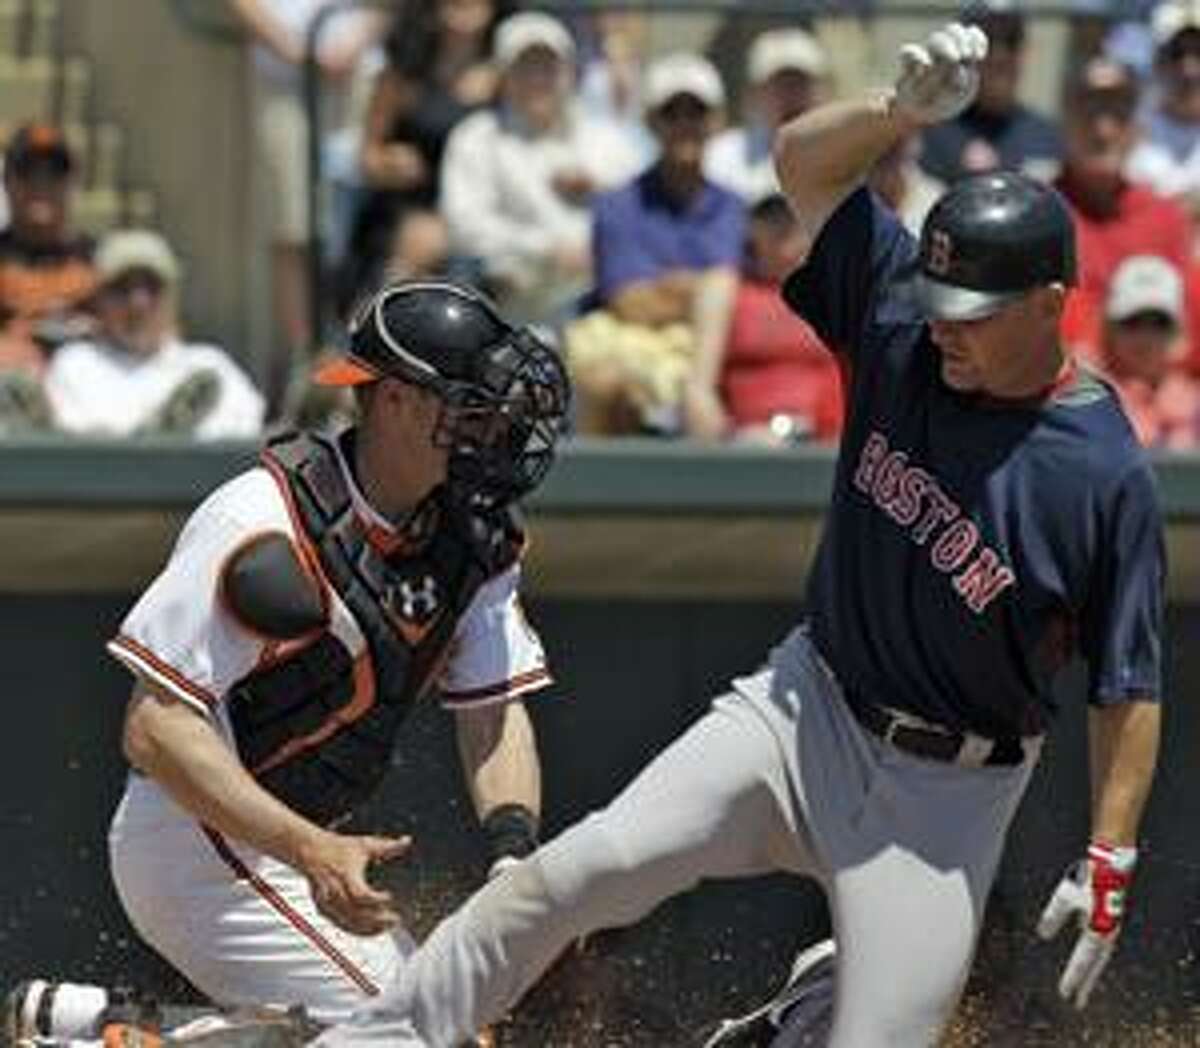 Boston Red Sox's J.D. Drew, right, scores ahead of the tag by Baltimore Orioles catcher Matt Wieters during the second inning of a spring training baseball game Wednesday, March 31, 2010, in Sarasota, Fla. Drew scored on a sacrifice fly by Josh Reddick. (AP Photo/Chris O'Meara)